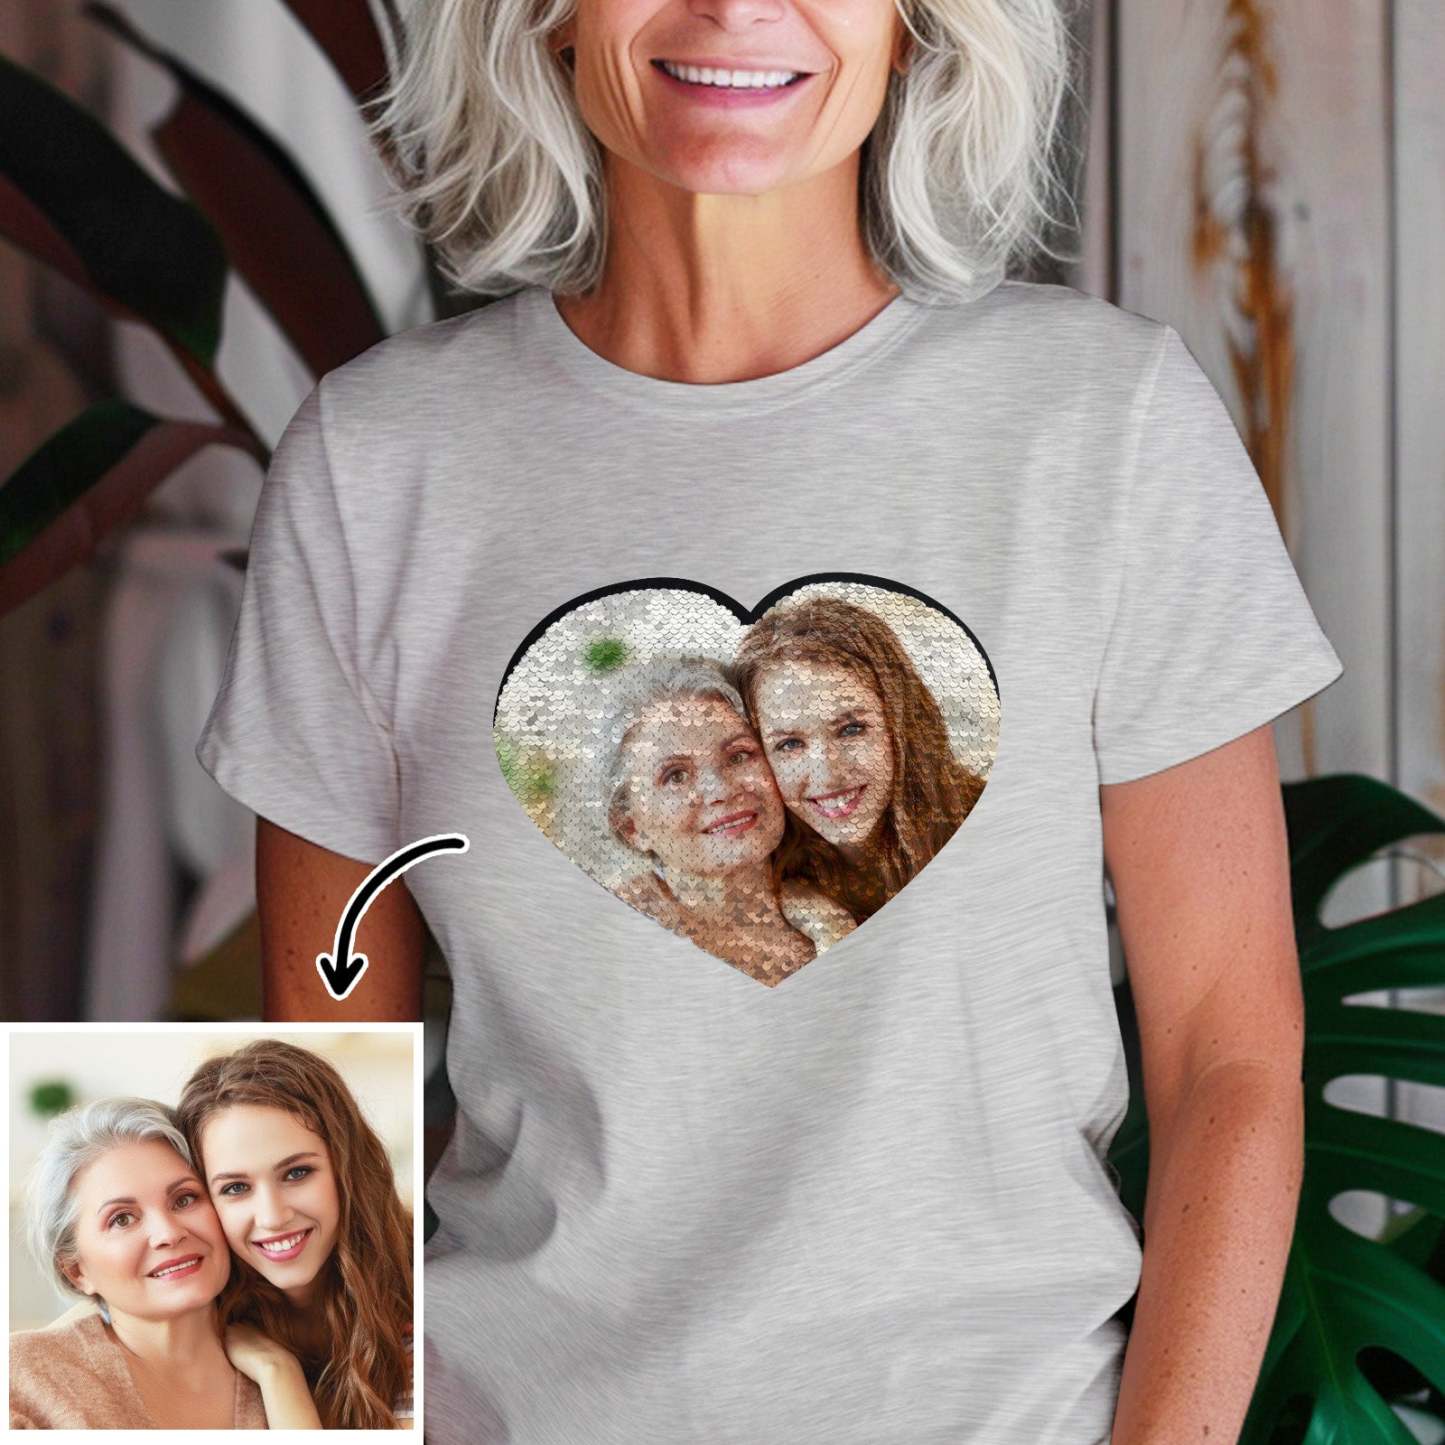 Custom Photo Heart Flip Double Sided Sequin T-shirt Personalized Picture Sequin Tee Mother's Day Gifts - soufeelau